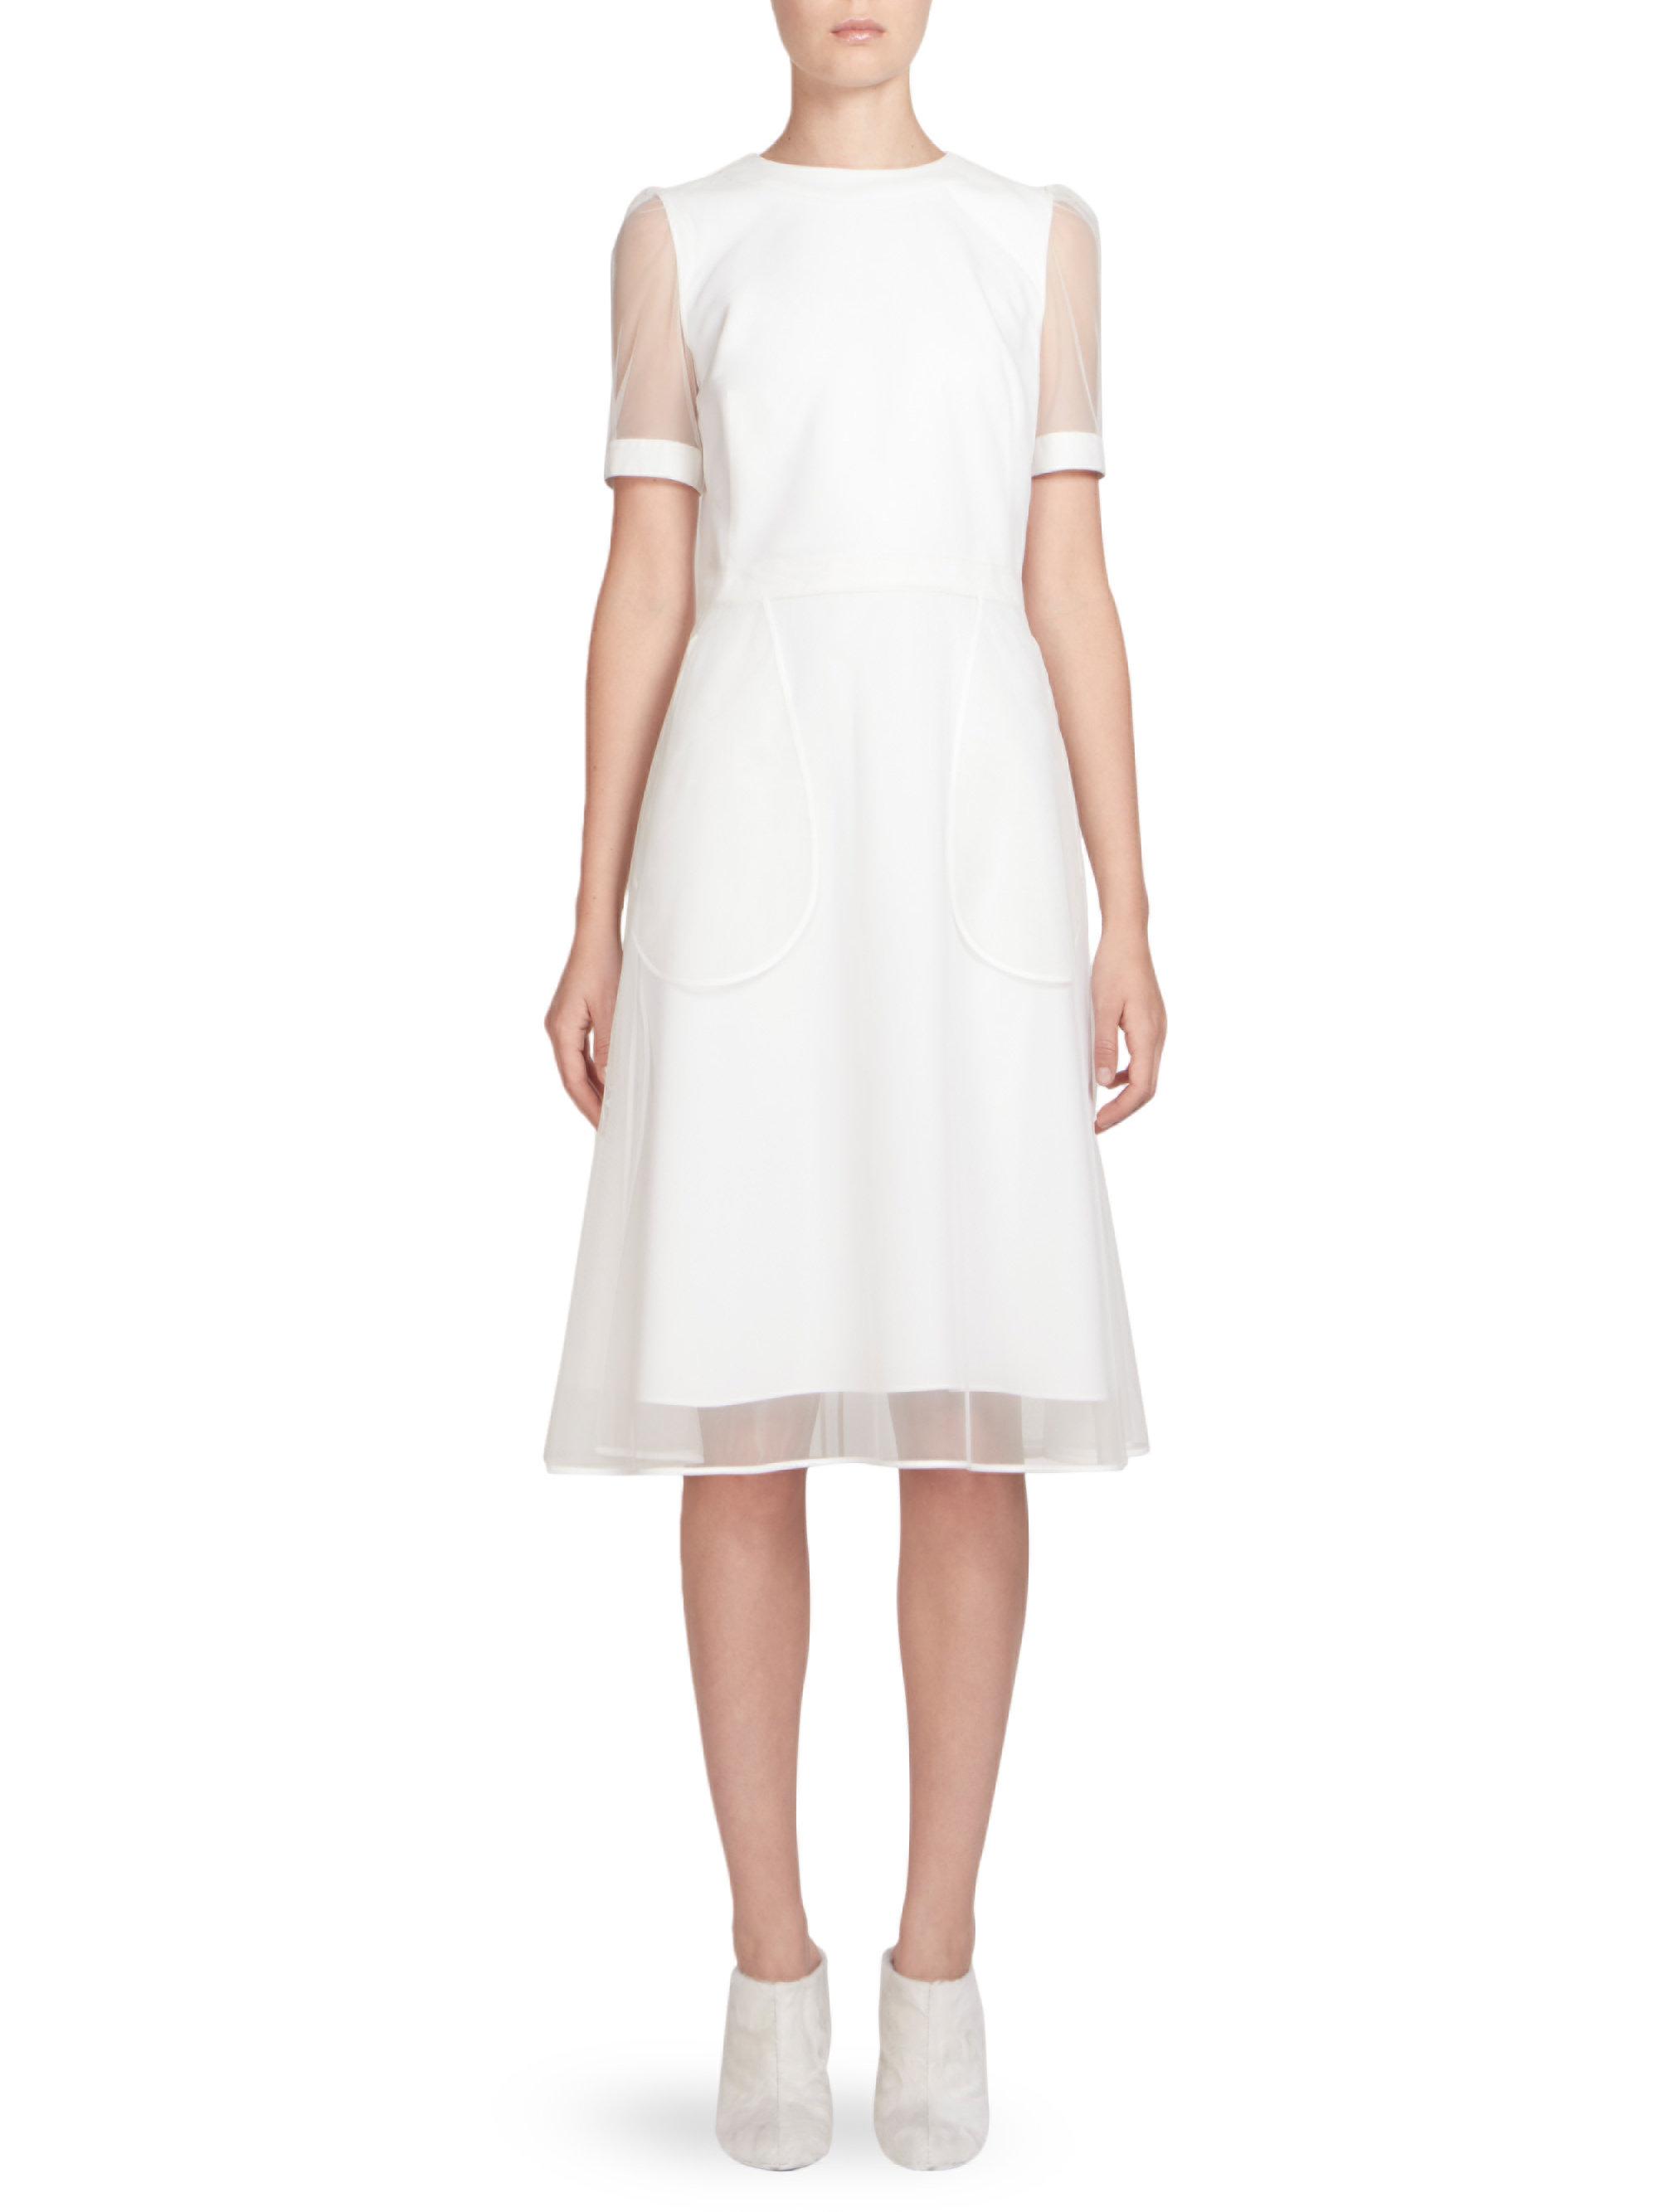 Givenchy Sheer Overlay Dress in White | Lyst